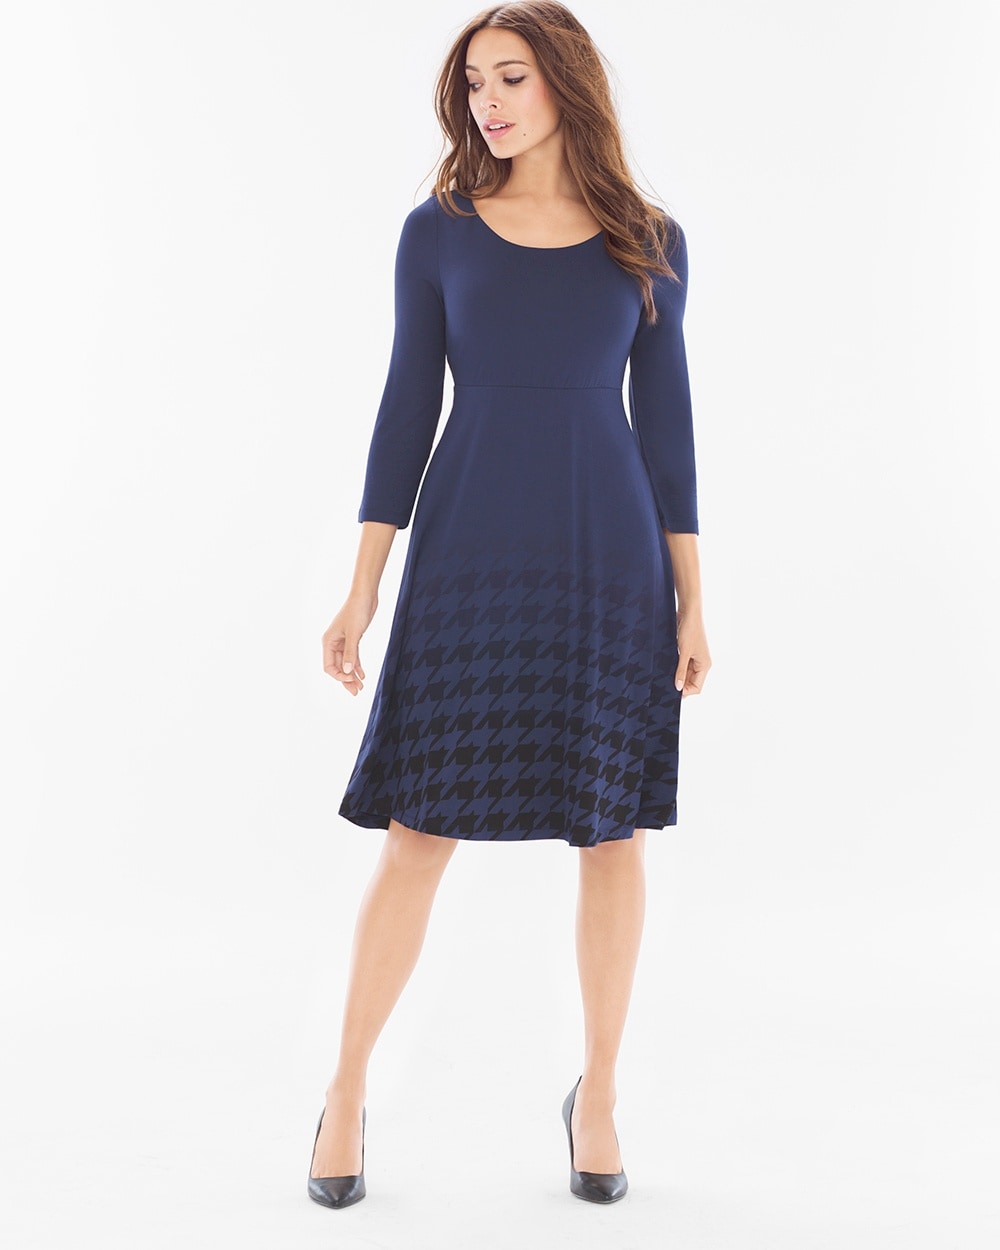 Fit and Flare Short Dress Houndstooth Ombre Navy